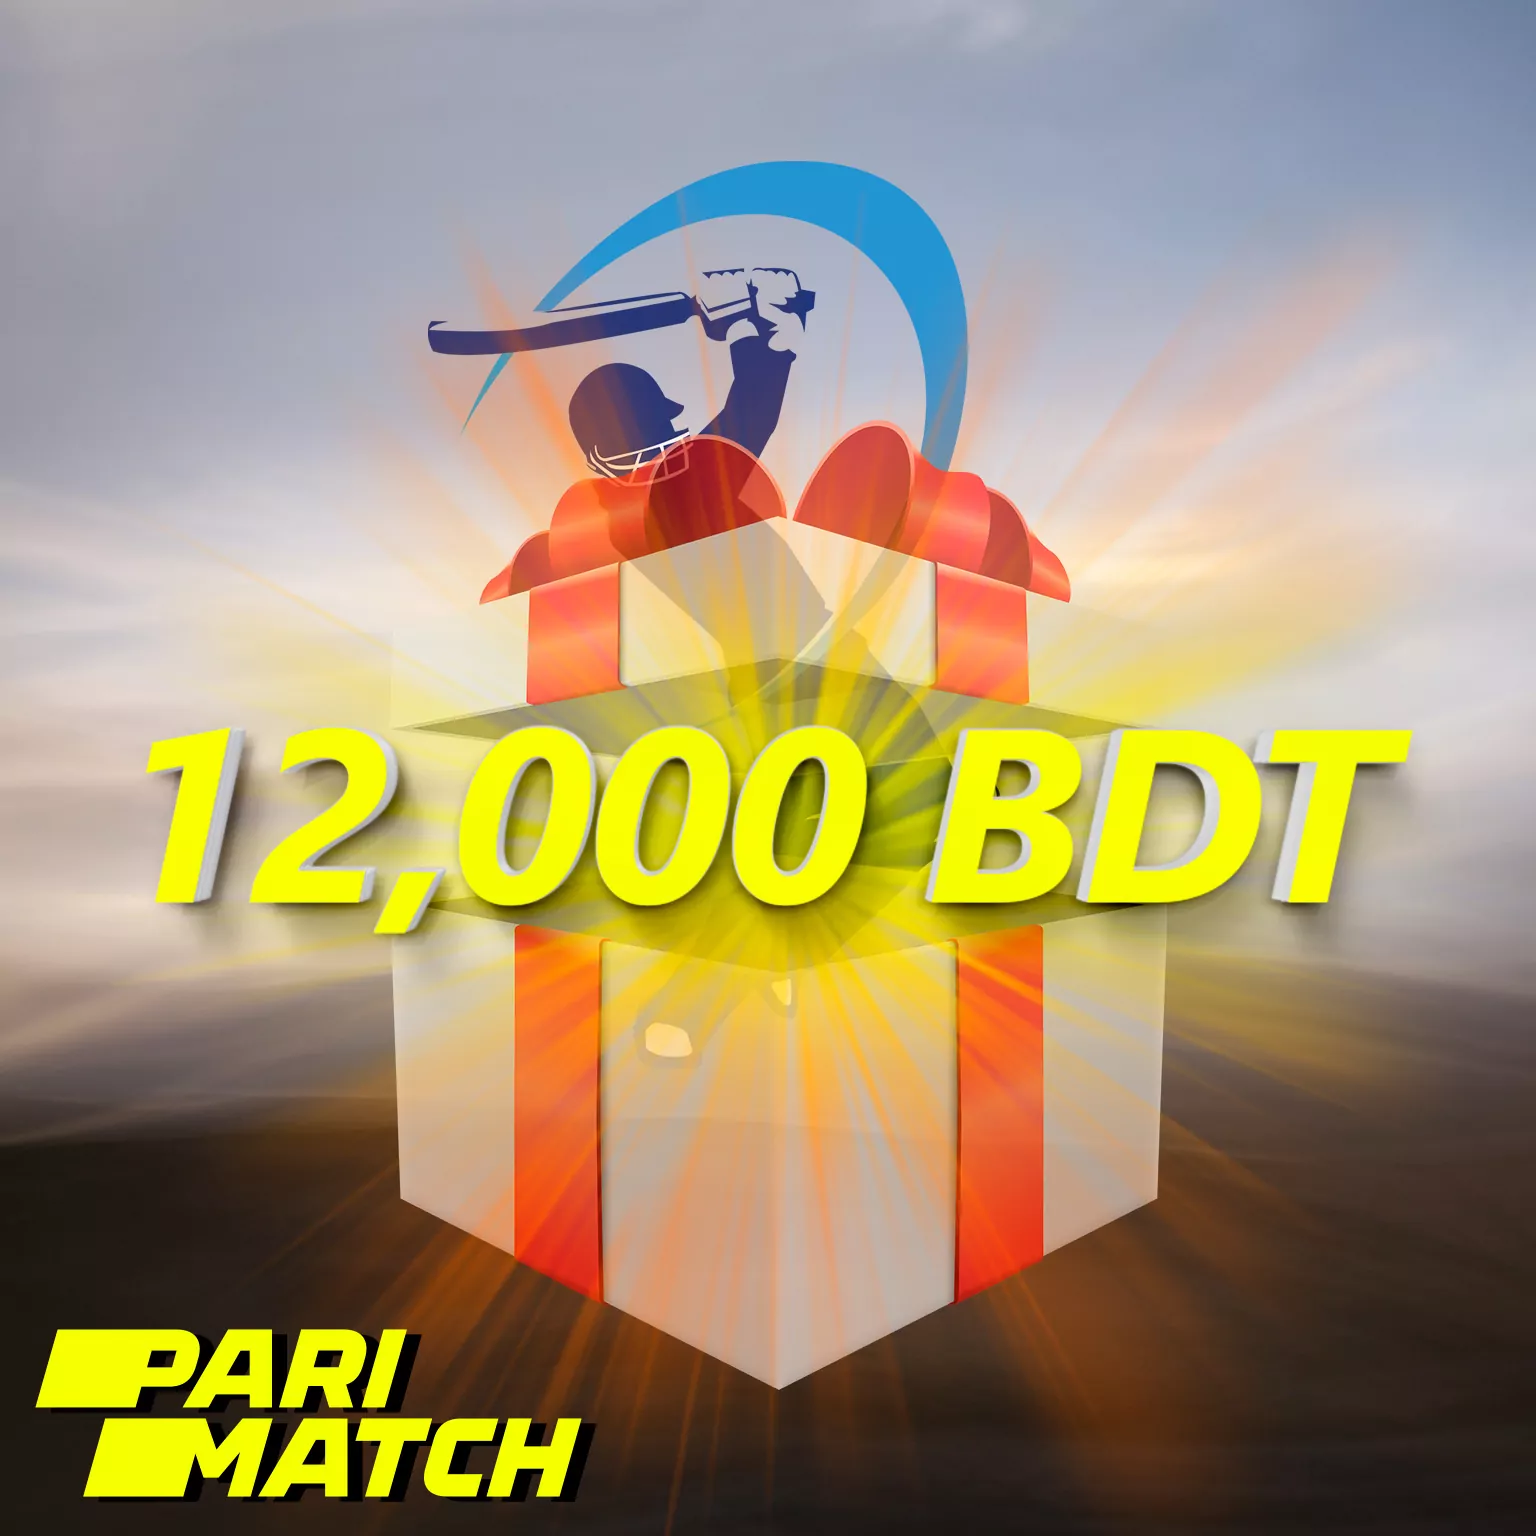 150% welcome bonus up to 12,000 BDT for betting on IPL events in Parimatch.